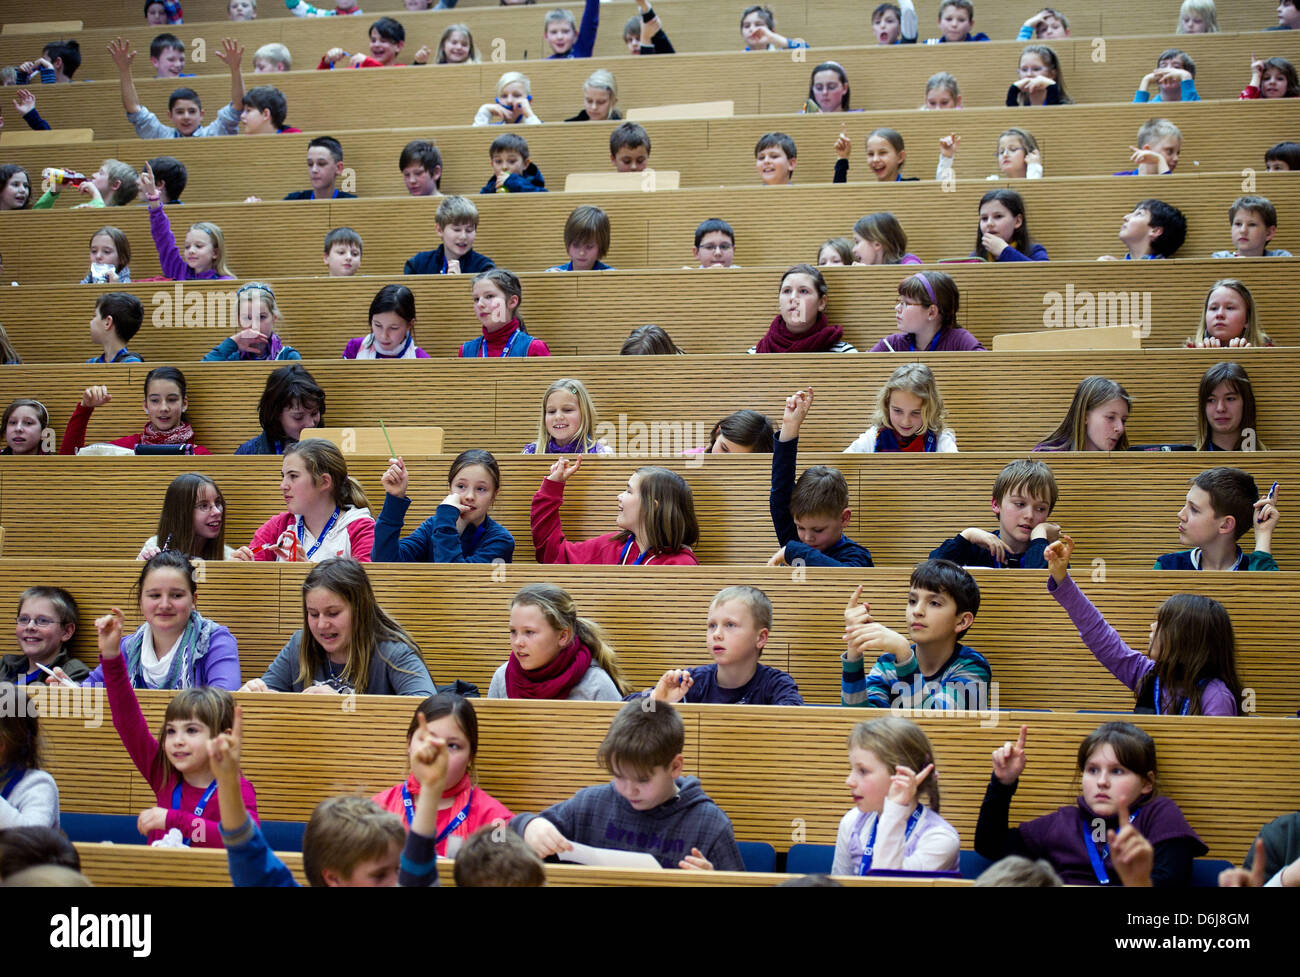 Children listen to the beginning lecture 'Stagecoaches, Railways and the Telegraph - The Internet of our Great Grandparents' at the 'Children's University' at the Viadrina European University in Frankfurt Oder, Germany, 07 March 2012. There are additional lectures every Wednesday until 28 March. The lectures are for children aged eight to 12. Photo: Patrick Pleul Stock Photo